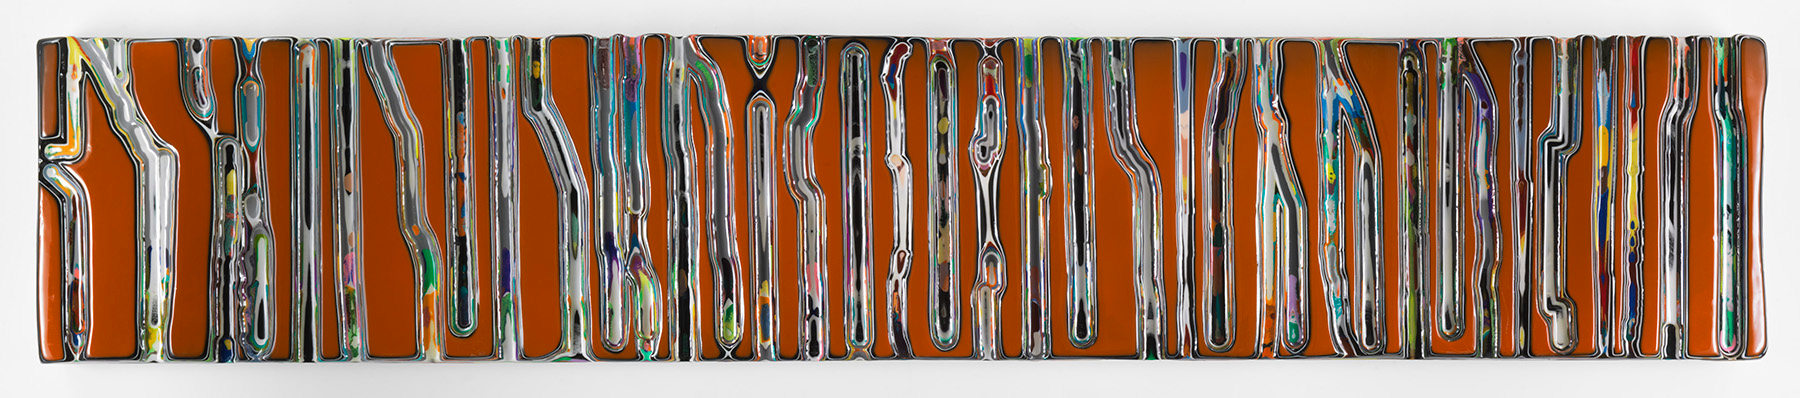 EATINGNIGHTHOOKS, 2016, Epoxy resin and pigments on wood, 18 x 96 inches, 45.7 x 243.8 cm, AMY#28452